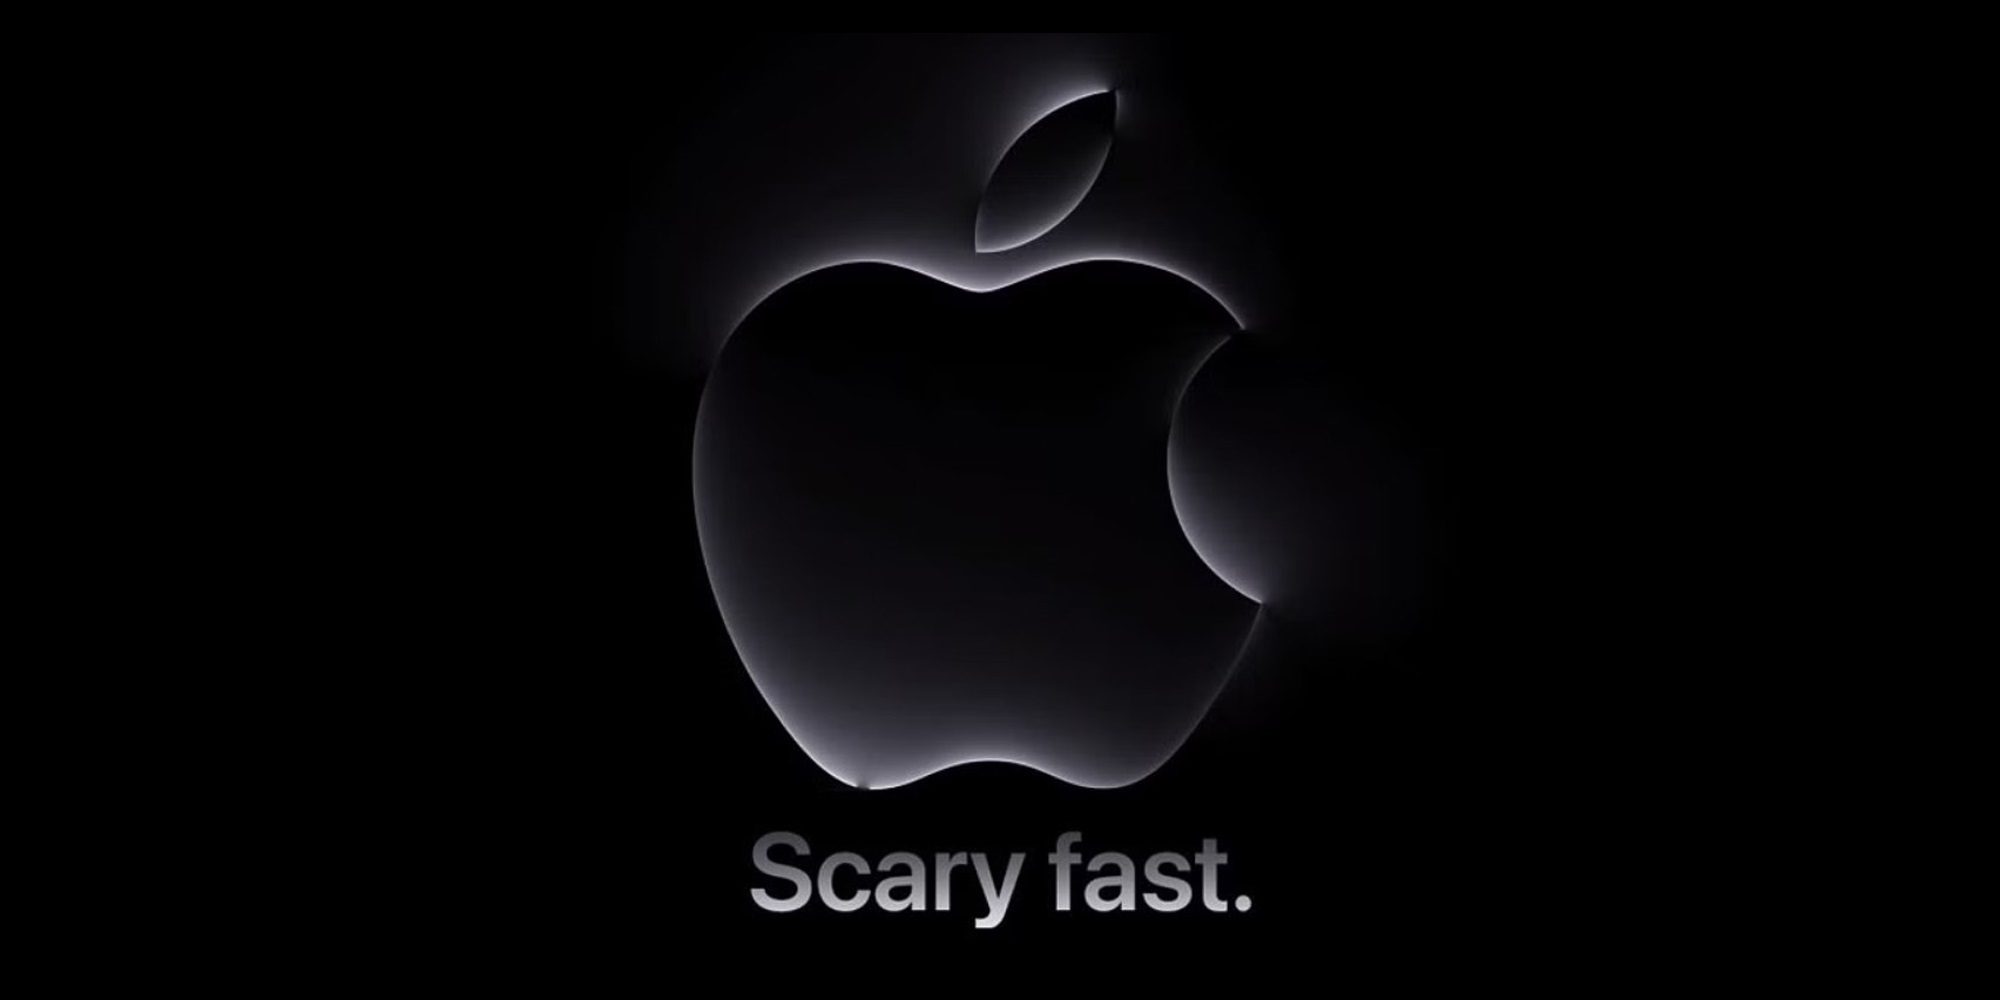 Scary Fast اپل